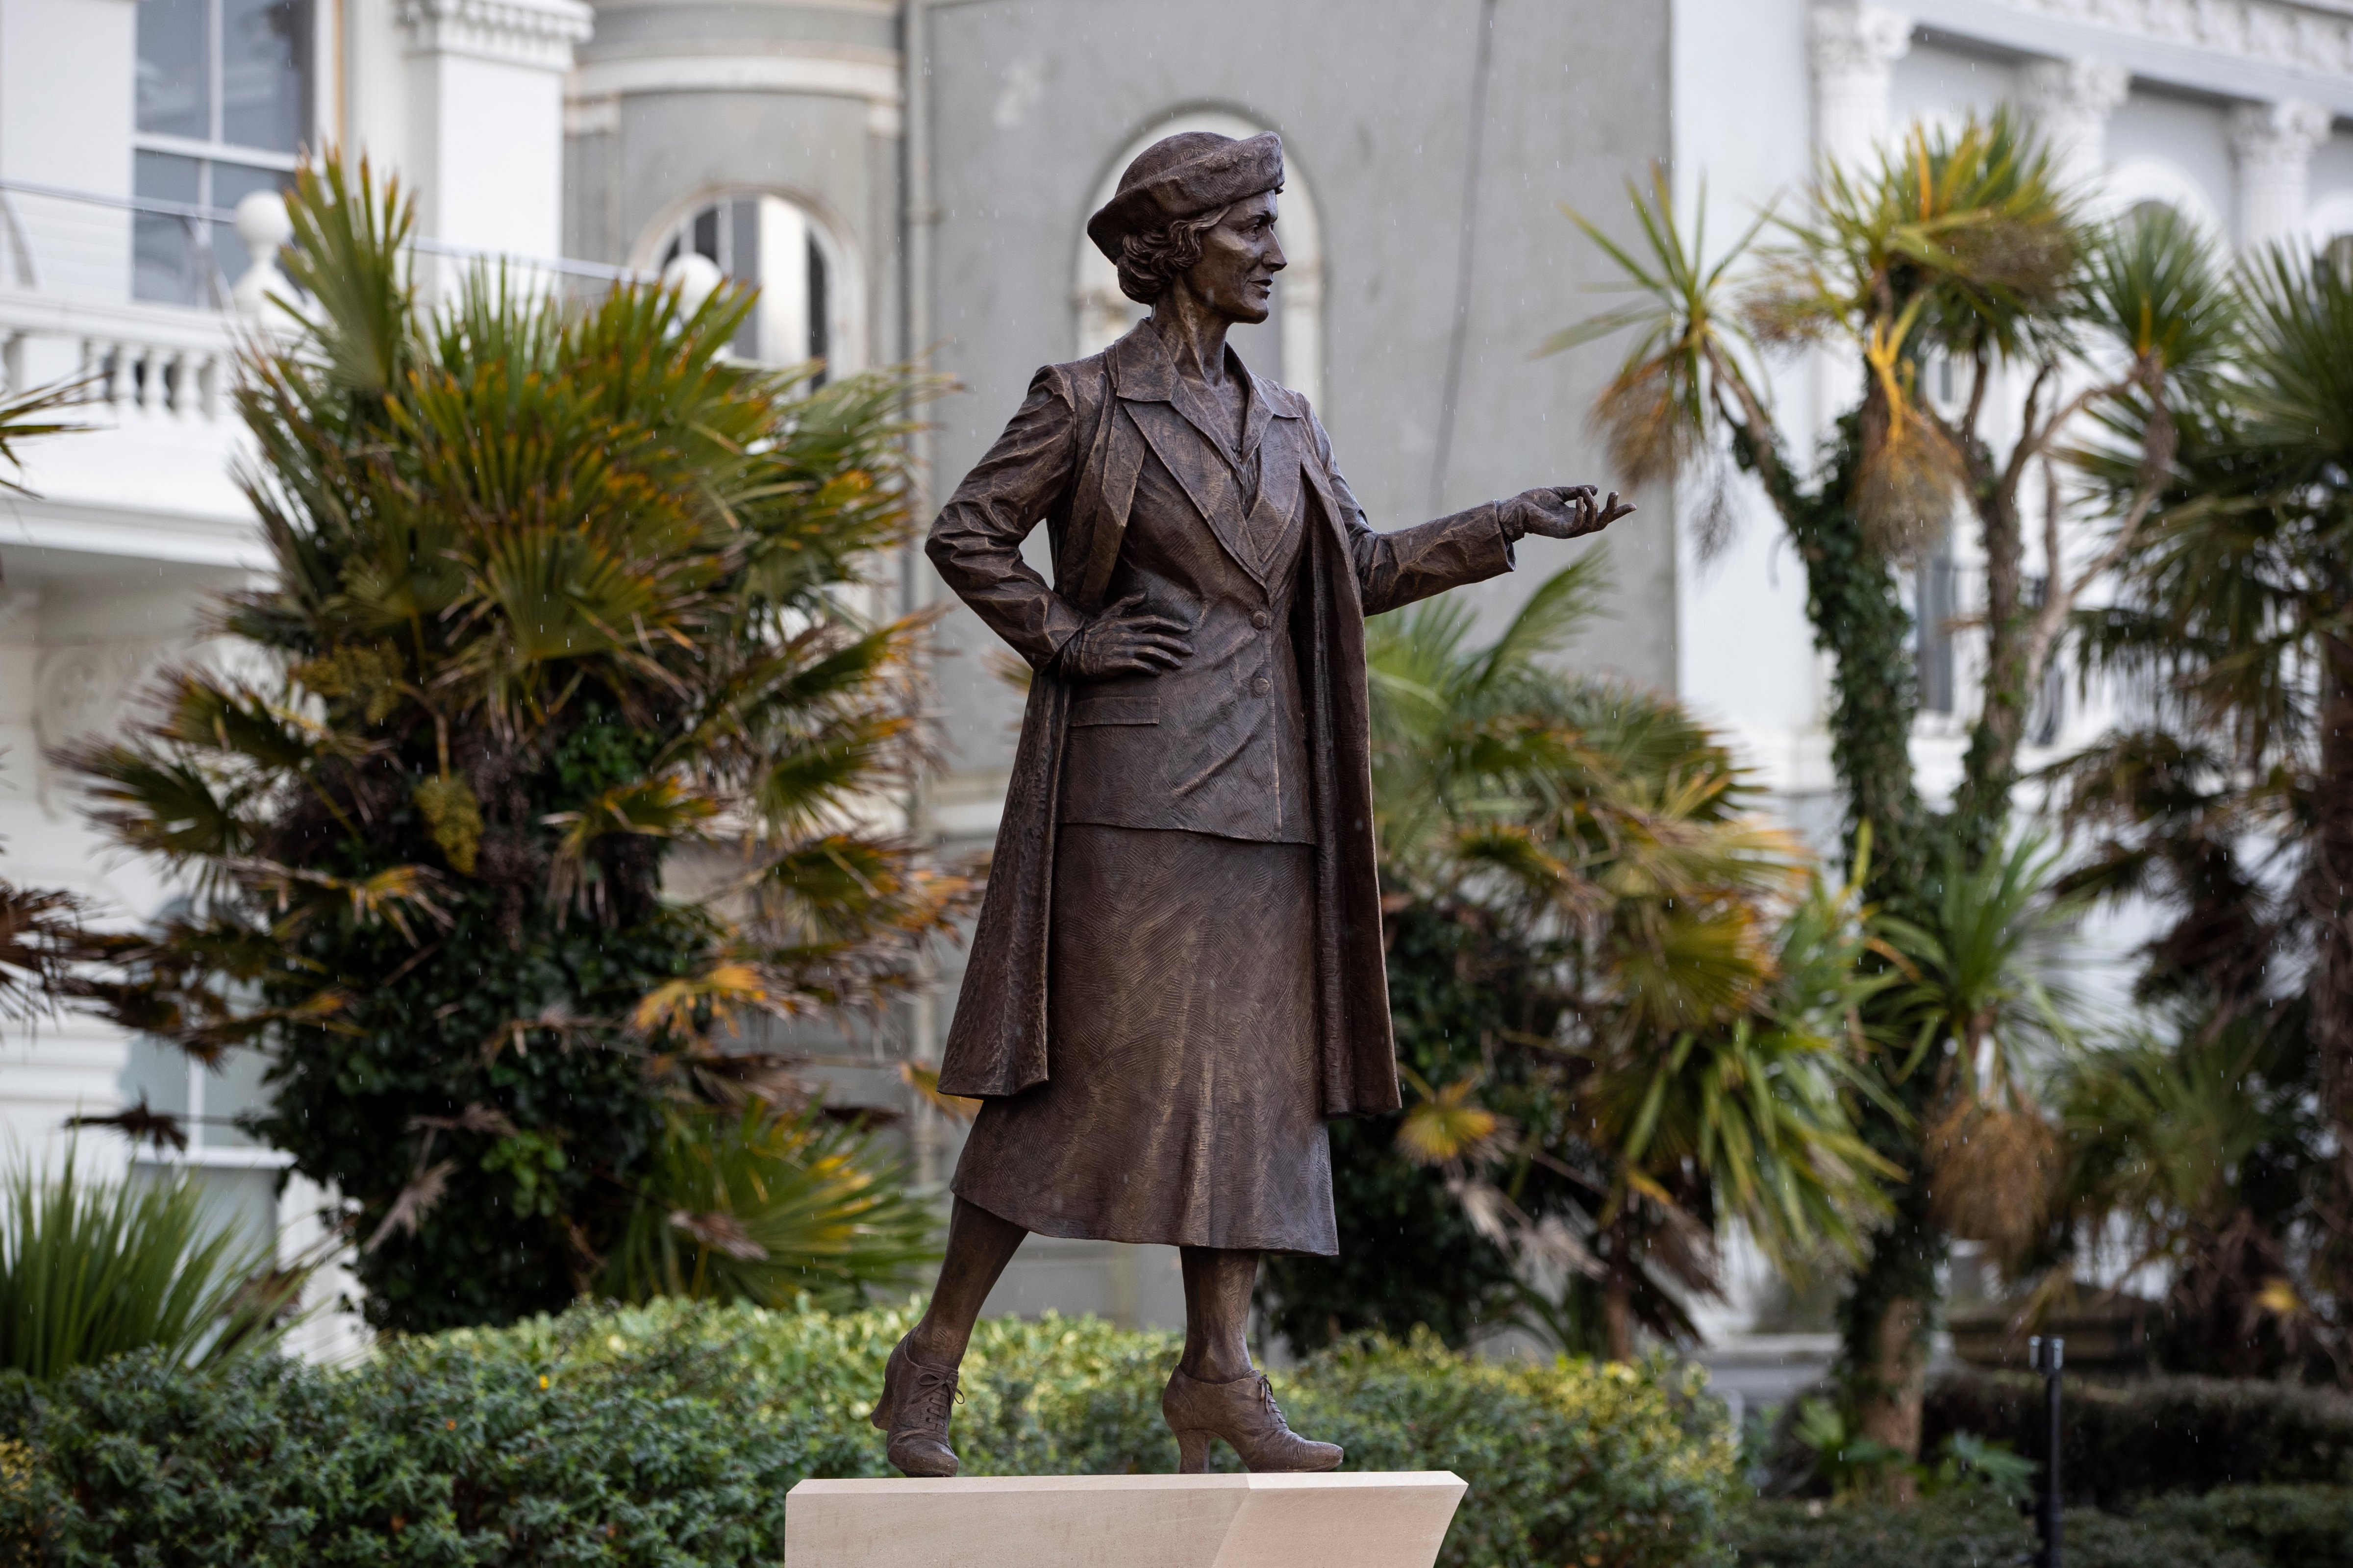 A statue of Nancy Astor, the first female MP to take her seat in the House of Commons 100 years ago, in Plymouth, England. The statue was unveiled on Nov. 28, 2019 by former British Prime minister Theresa May. (Dan Kitwood—Getty Images)